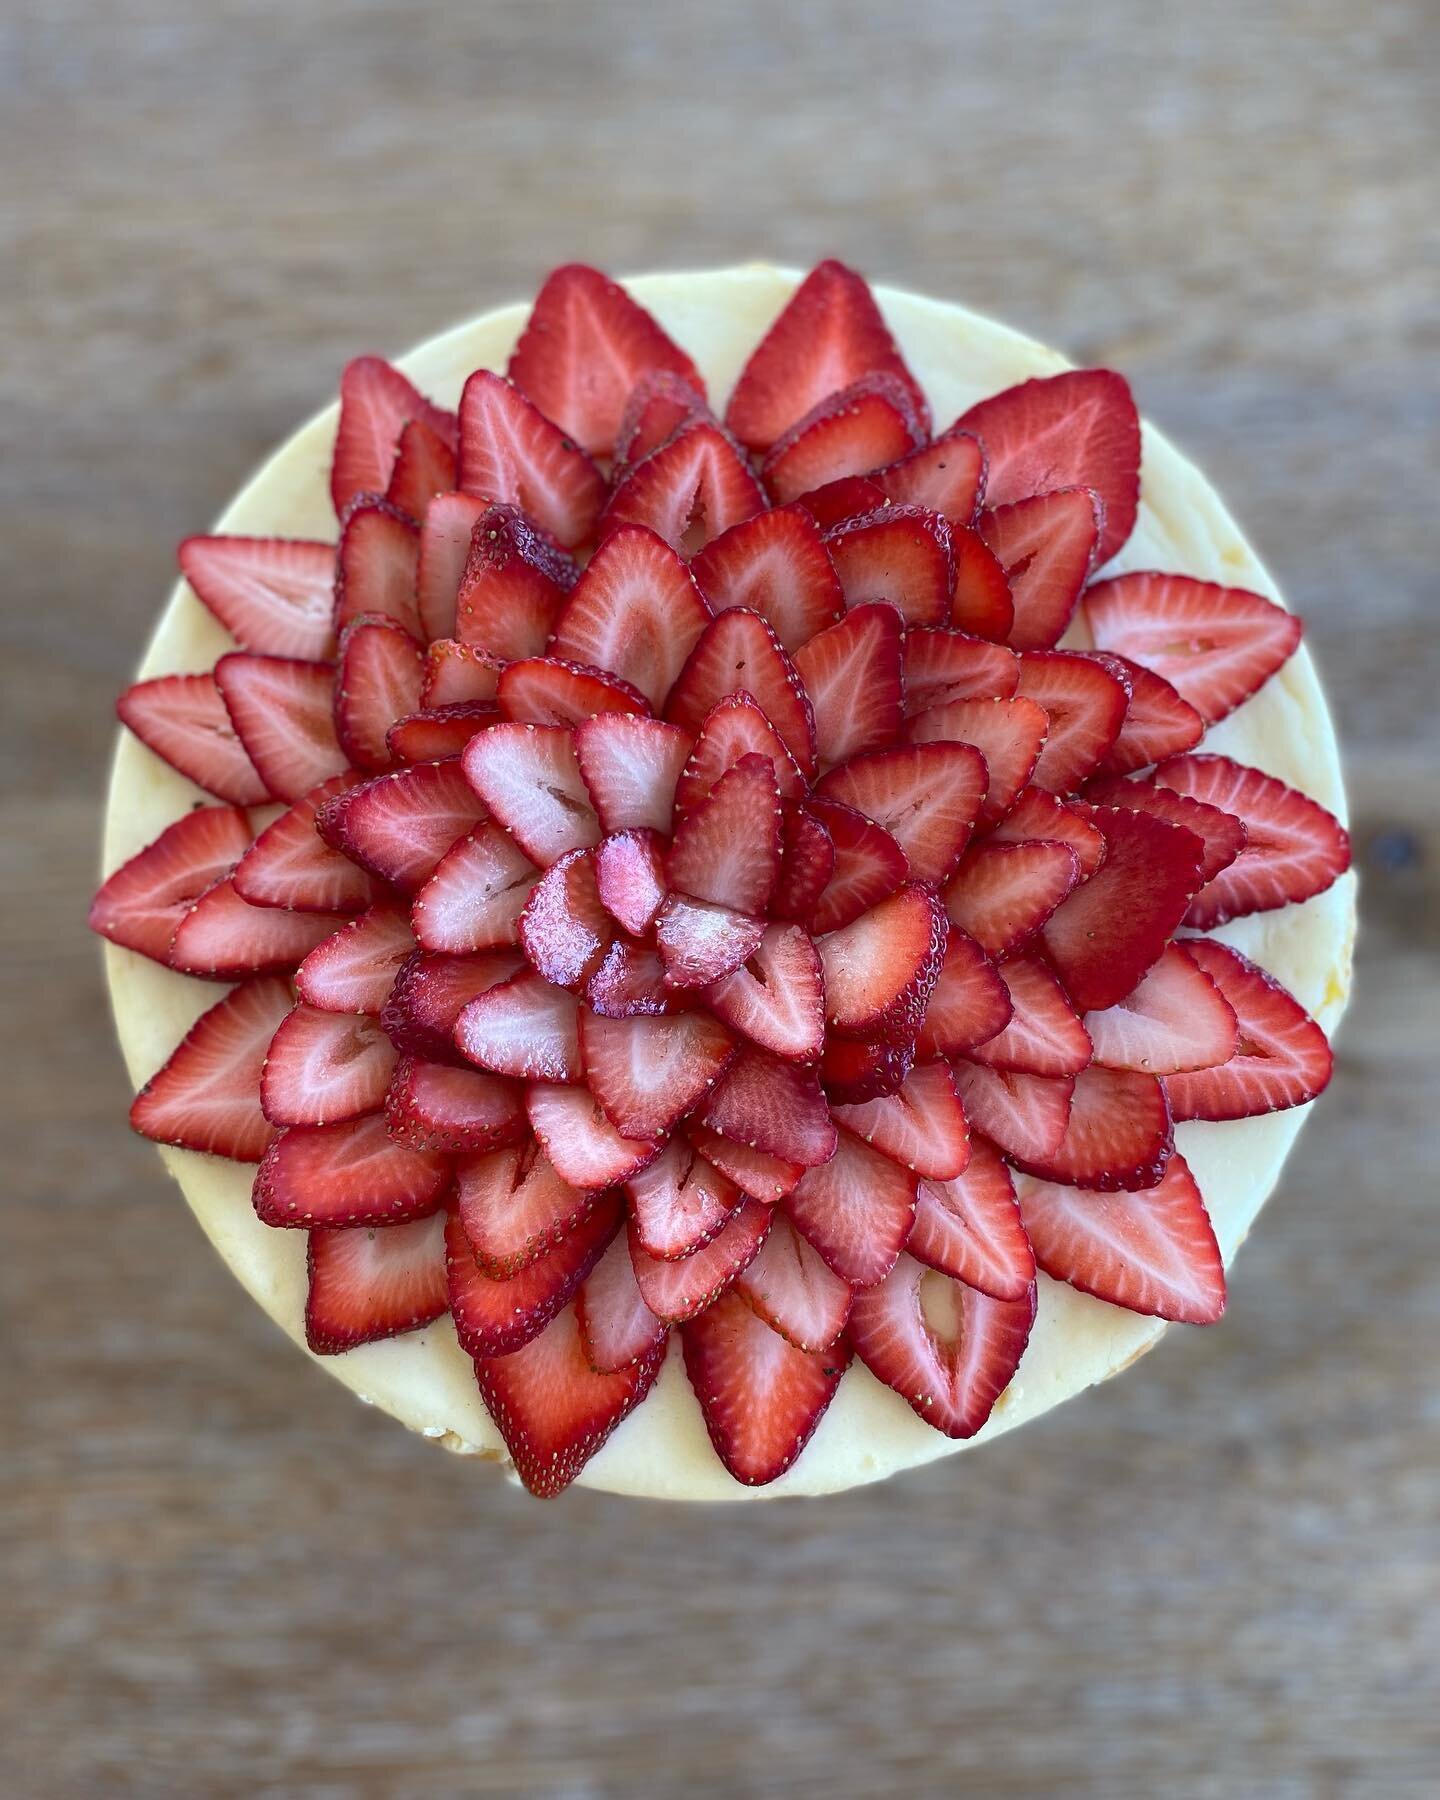 🎂🎂GIVEAWAY🎂🎂

Do you want a piece of this?! Actually, do you want a whole cheesecake for free? Please join our giveaway by following this page and adding this post to your story. Winner will be announced in one week.

Also, checkout our new websi